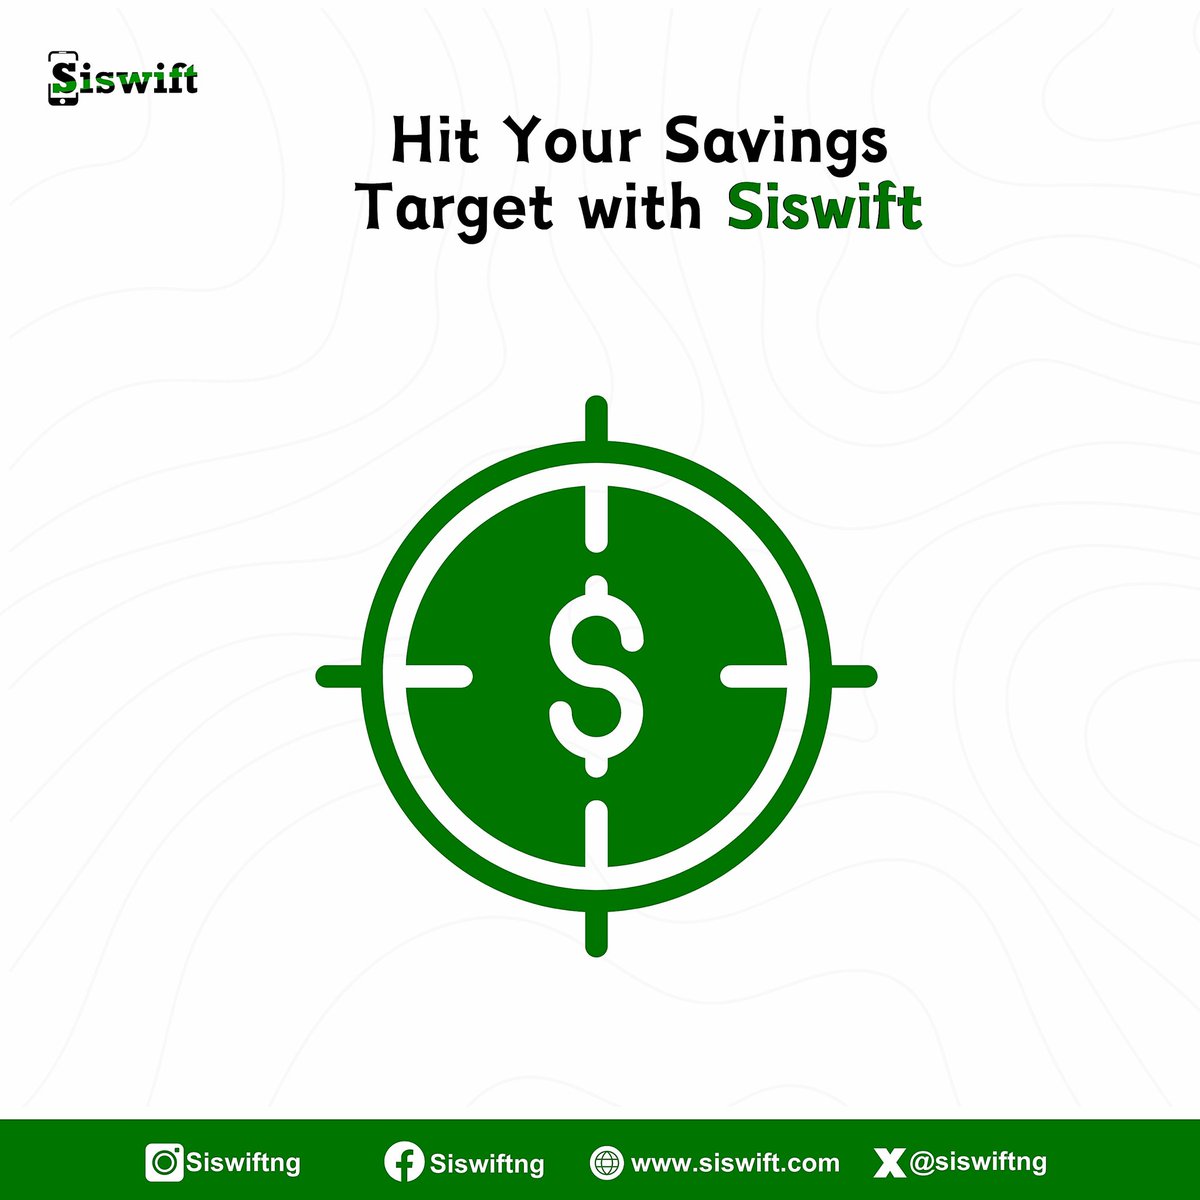 Aim for savings with Siswift!

Negotiate your way to success.
.
.
.
#Siswift #AimForSavings #transparenttransactions #negotiationpower #changingthegame #convenience #convenienceoverfixedprices #digitalmarketing #iphones #phones